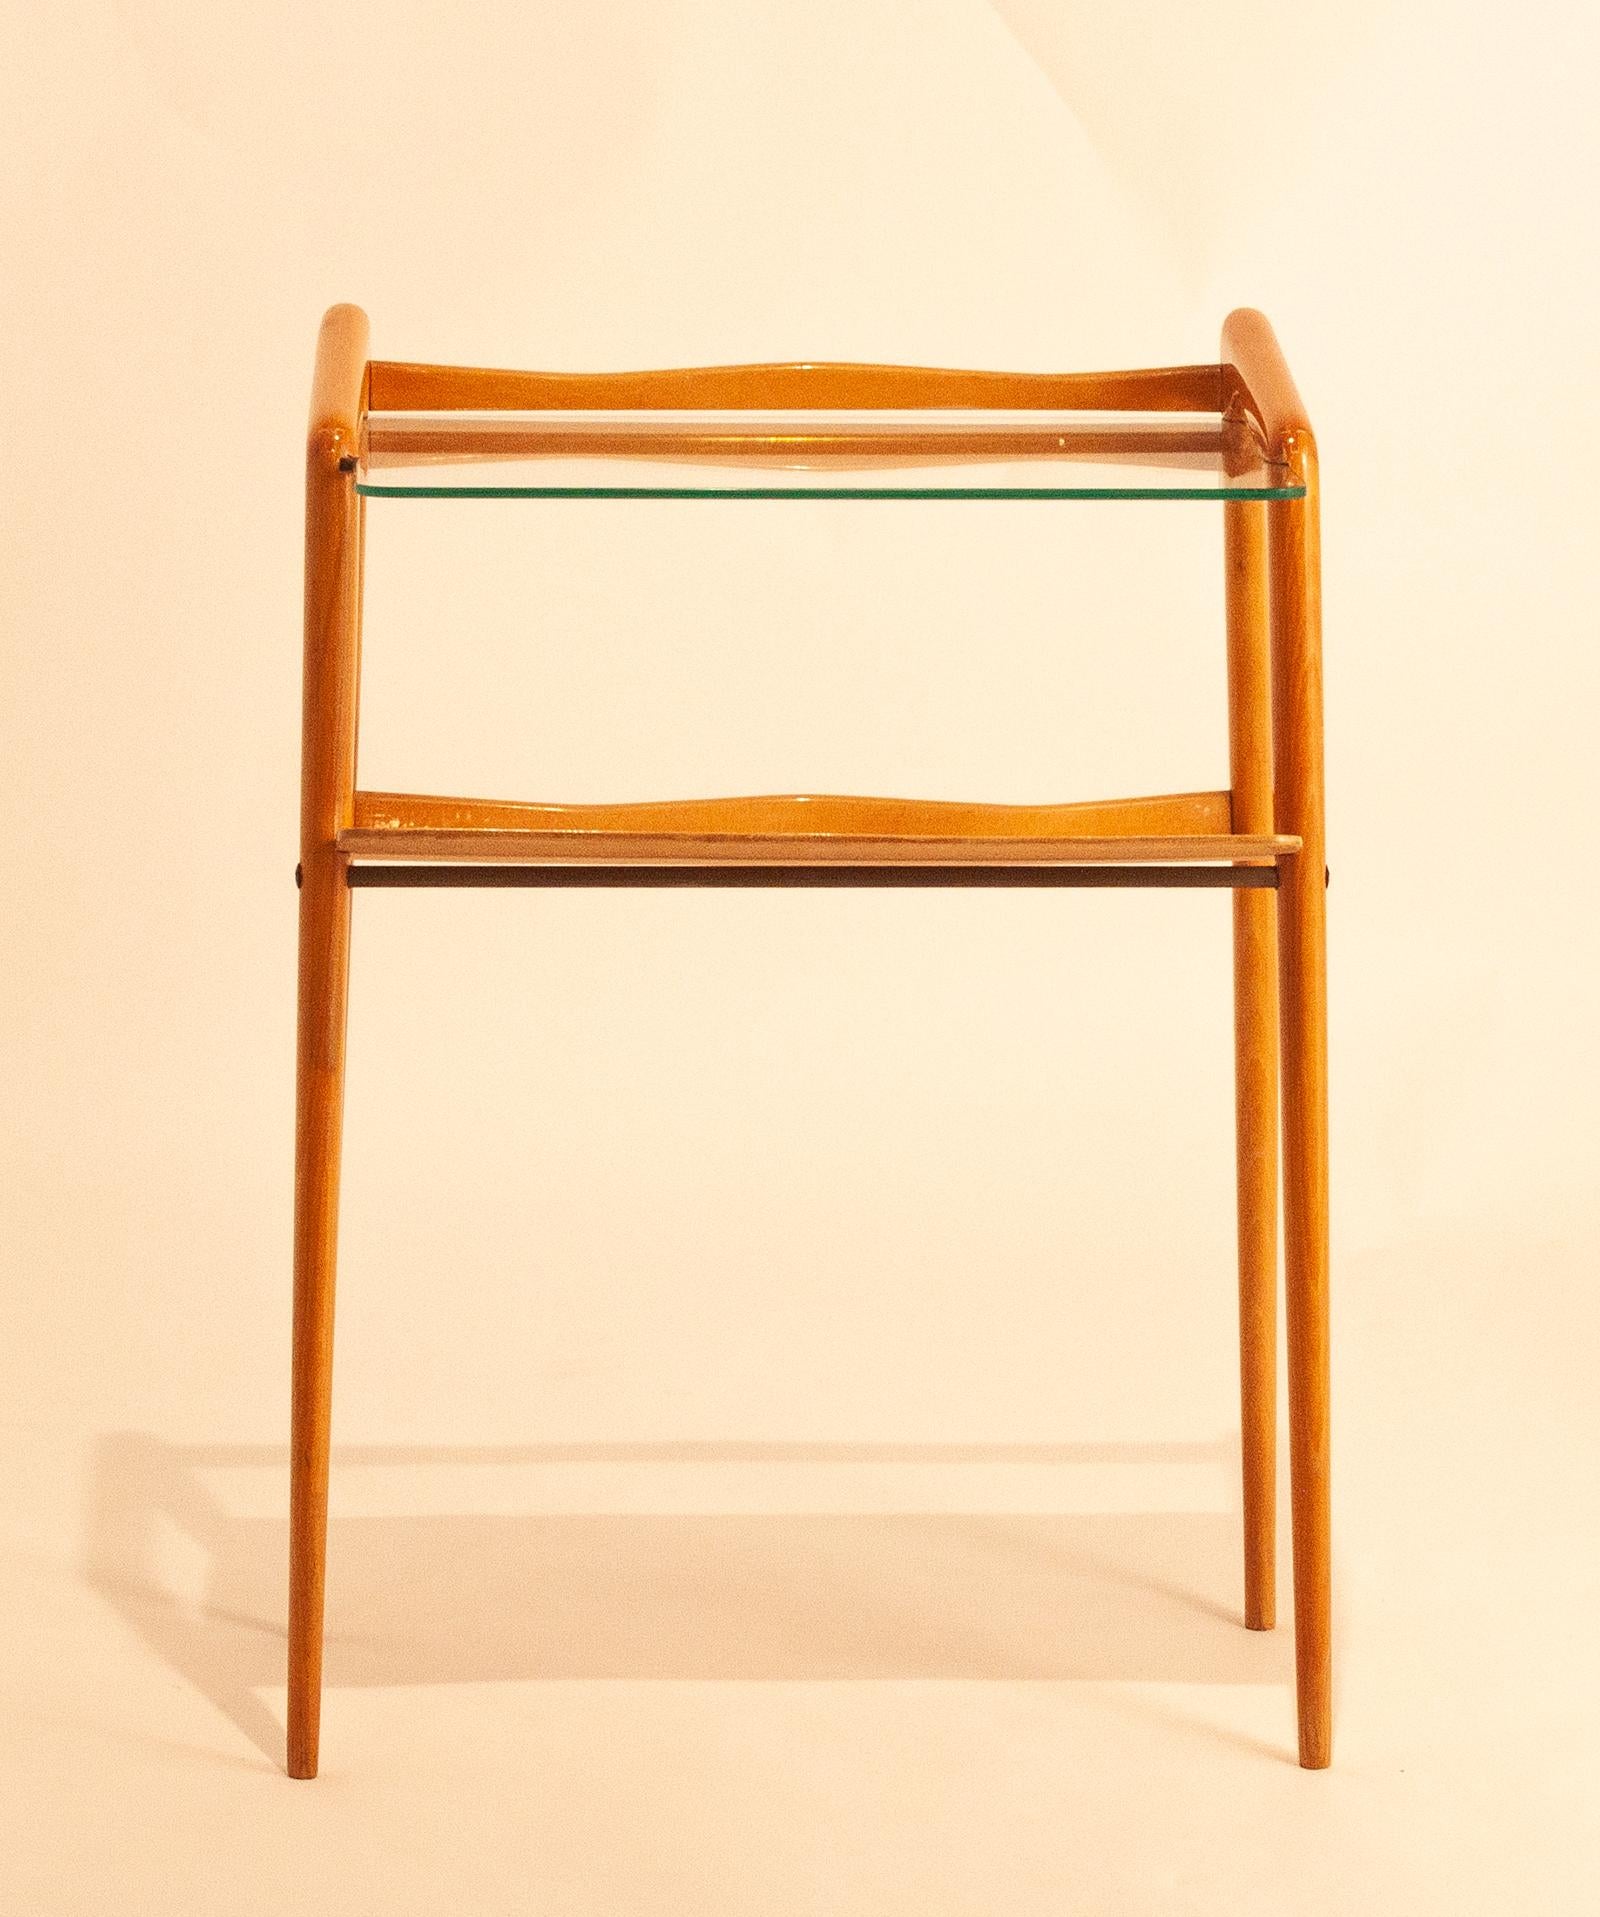 Mid-20th Century Italian Side Table designed by  Ico Parisi, Wood and Clear Glass, 1950s